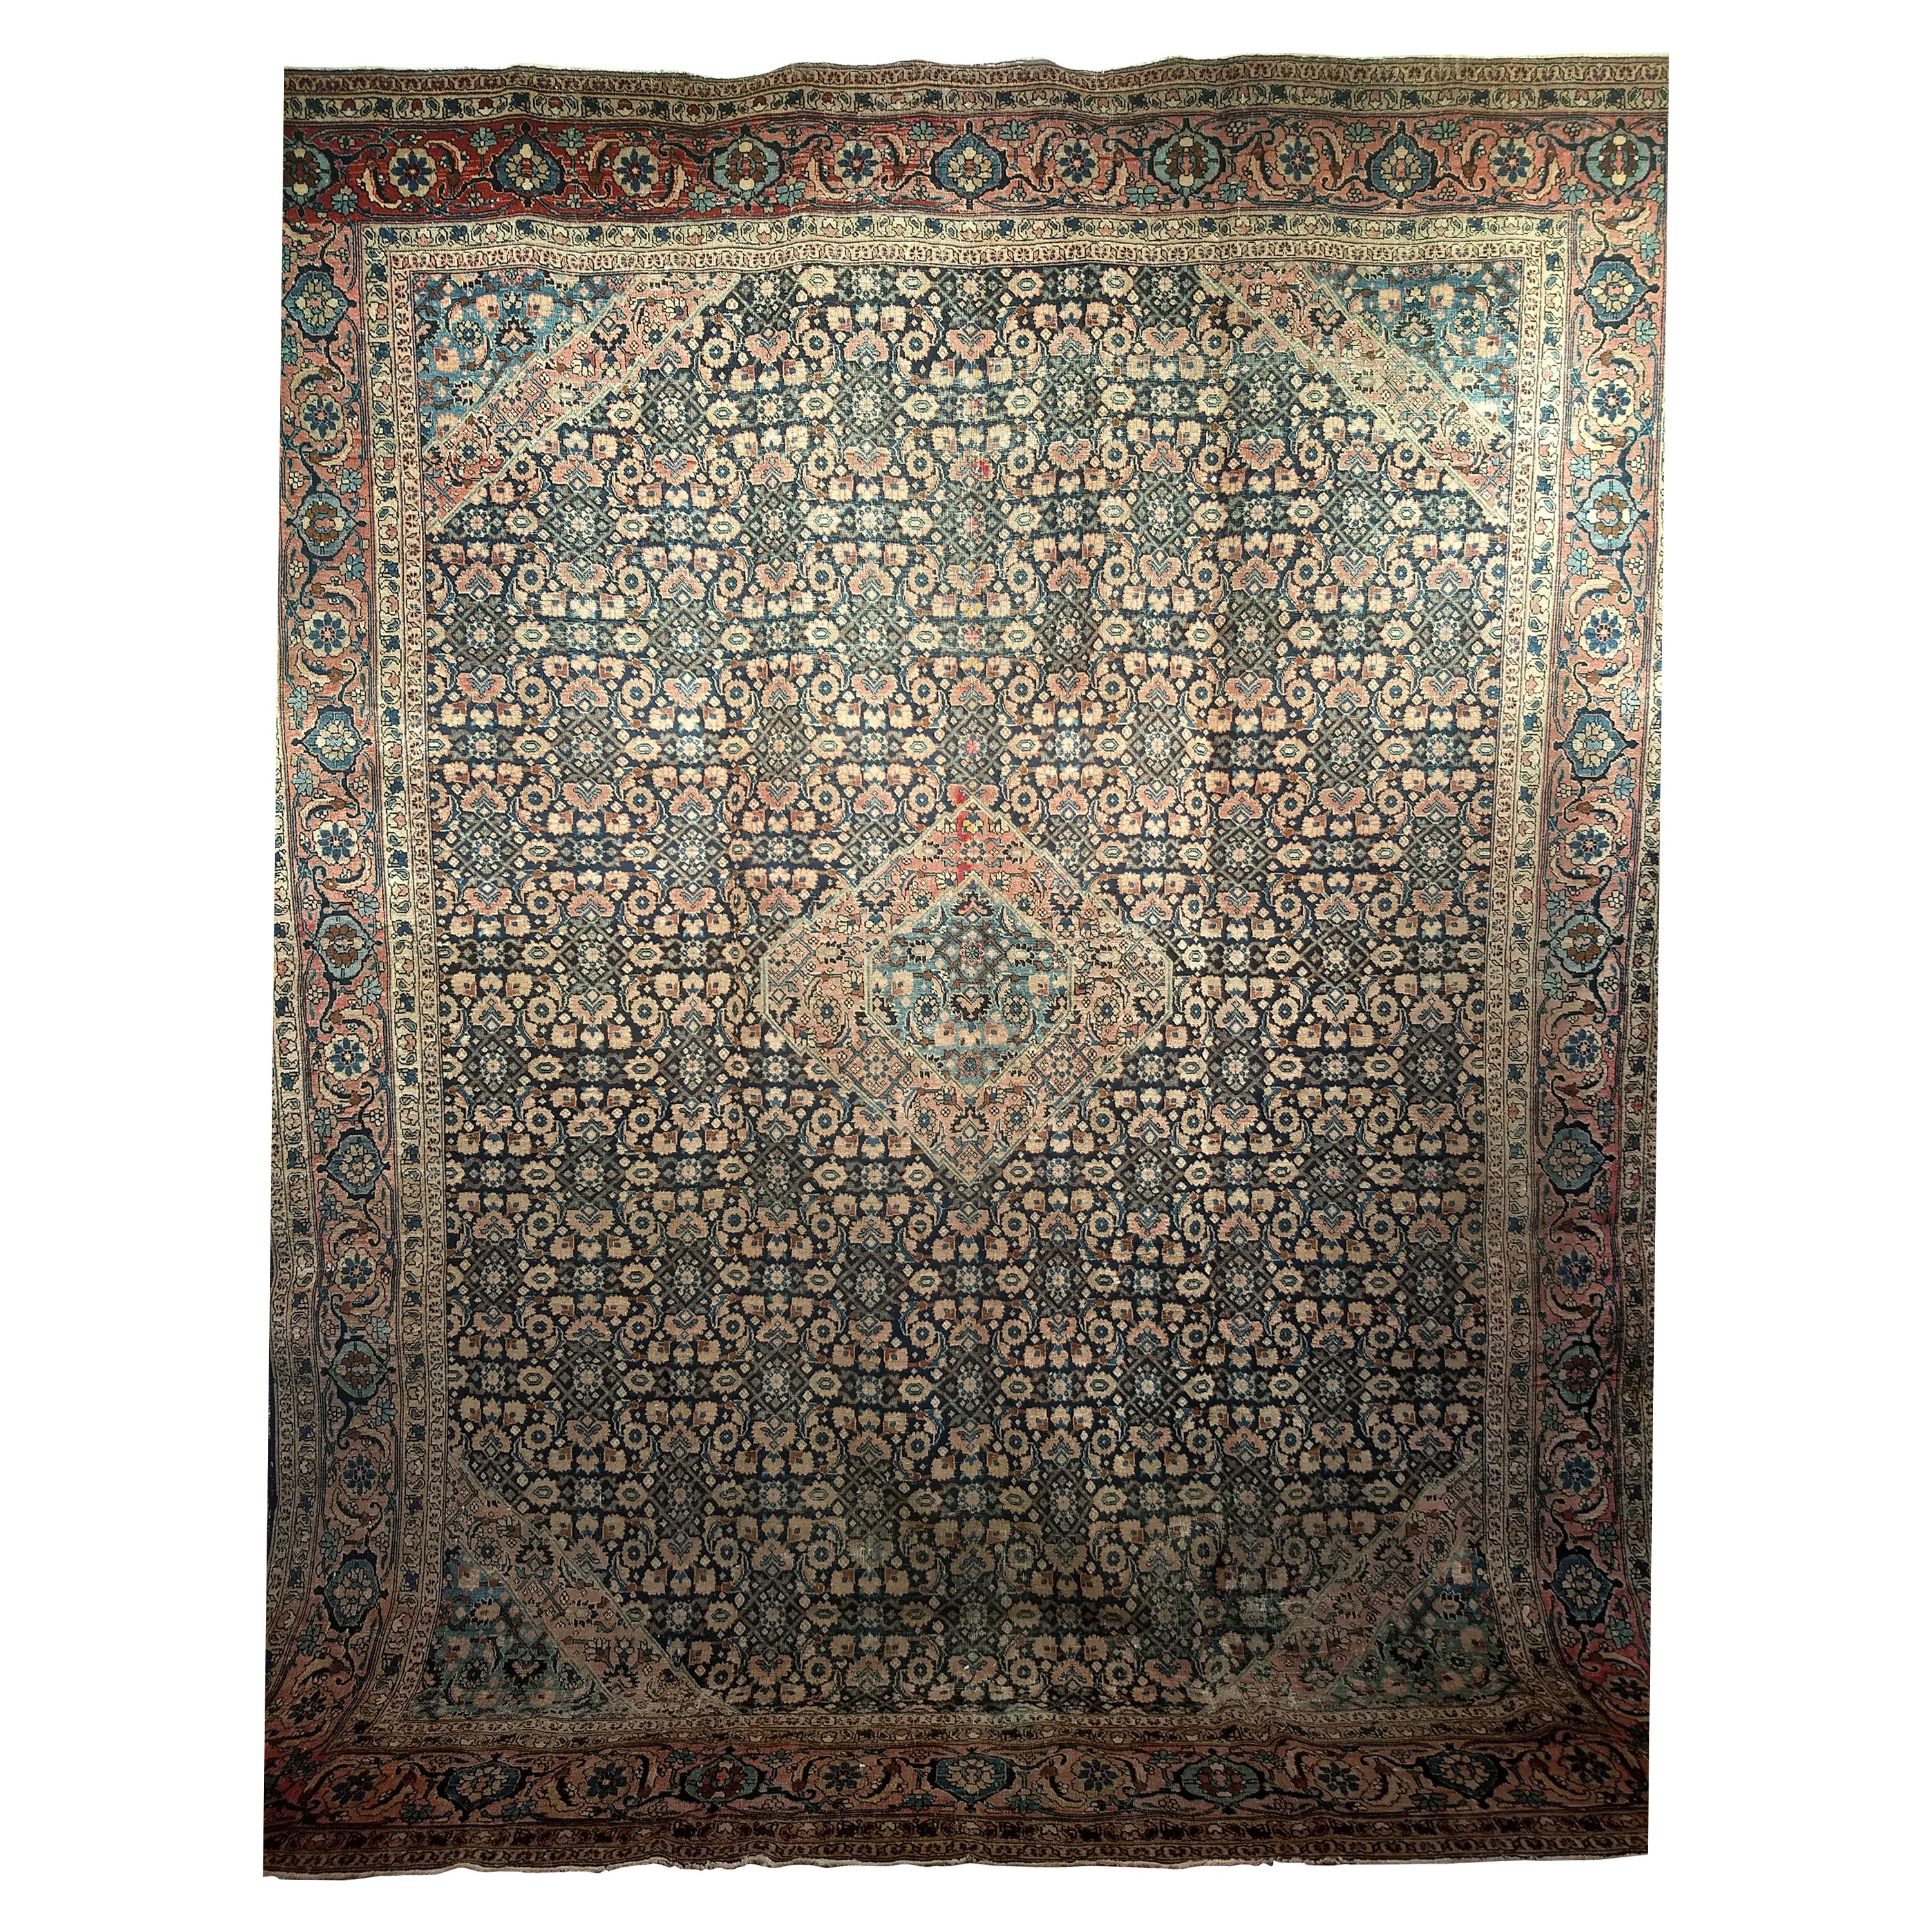 19th Century Persian Tabriz in an All-over Geometric Pattern in Midnight Blue